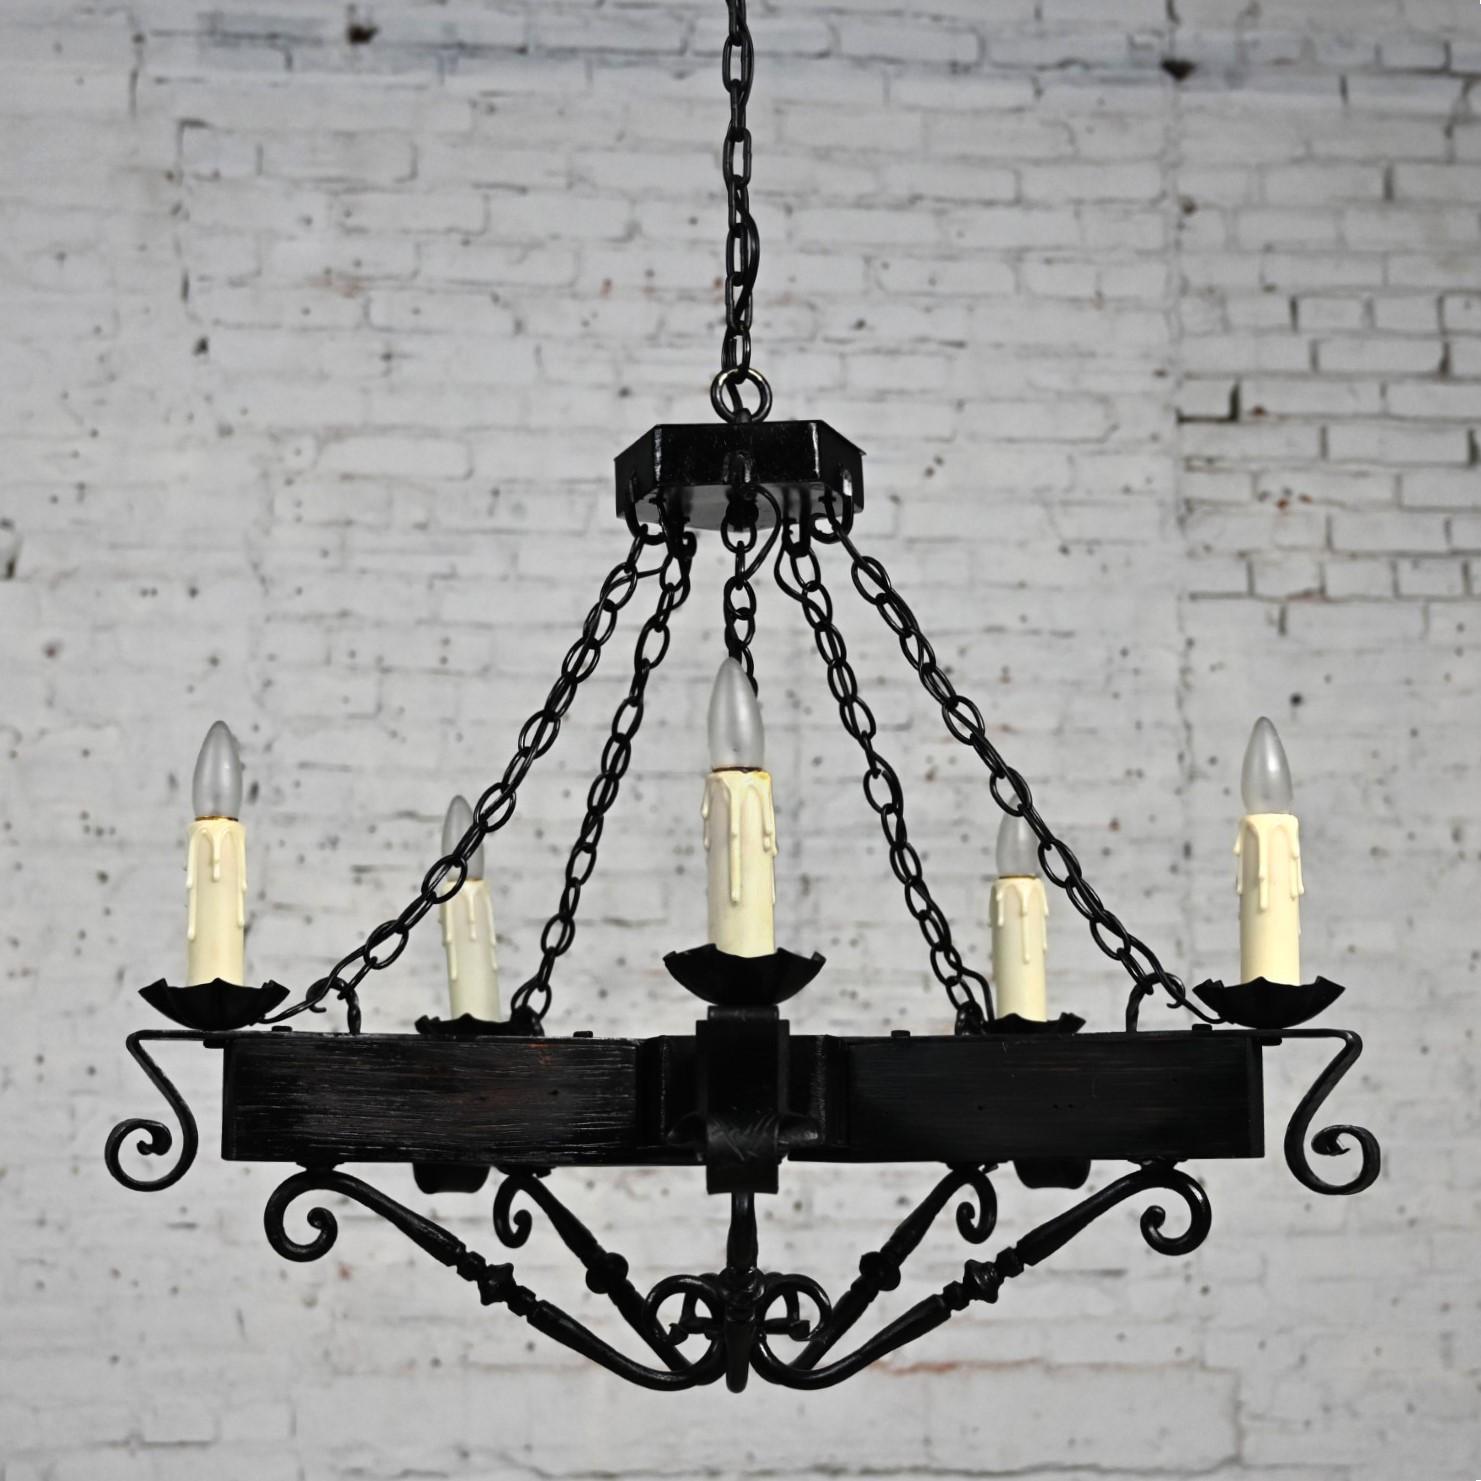 Marvelous vintage John C. Virden Medieval Gothic or Spanish Revival Style Hanging Light Fixture comprised of a 5-arm pentagon shaped black iron and wood fixture, a black iron chain, hammered iron details, candle posts, and a round brass canopy.